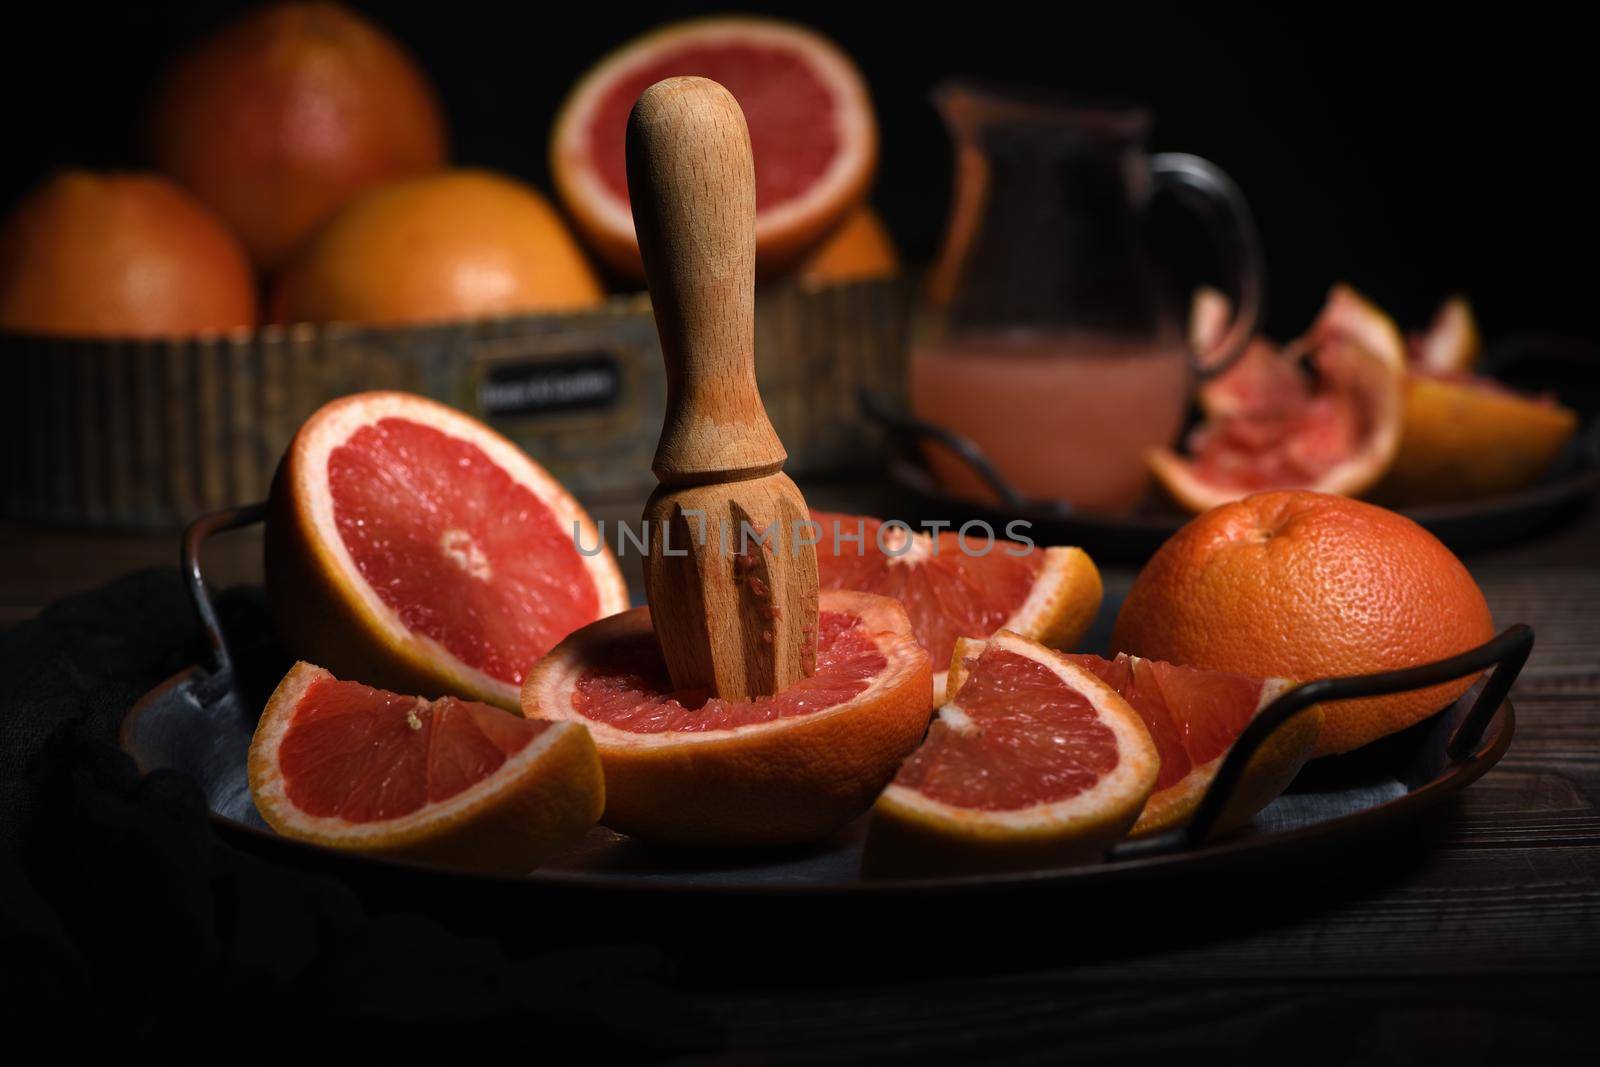 Slices of fresh grapefruit prepared for making fresh squeezed juice on a platter, dark background